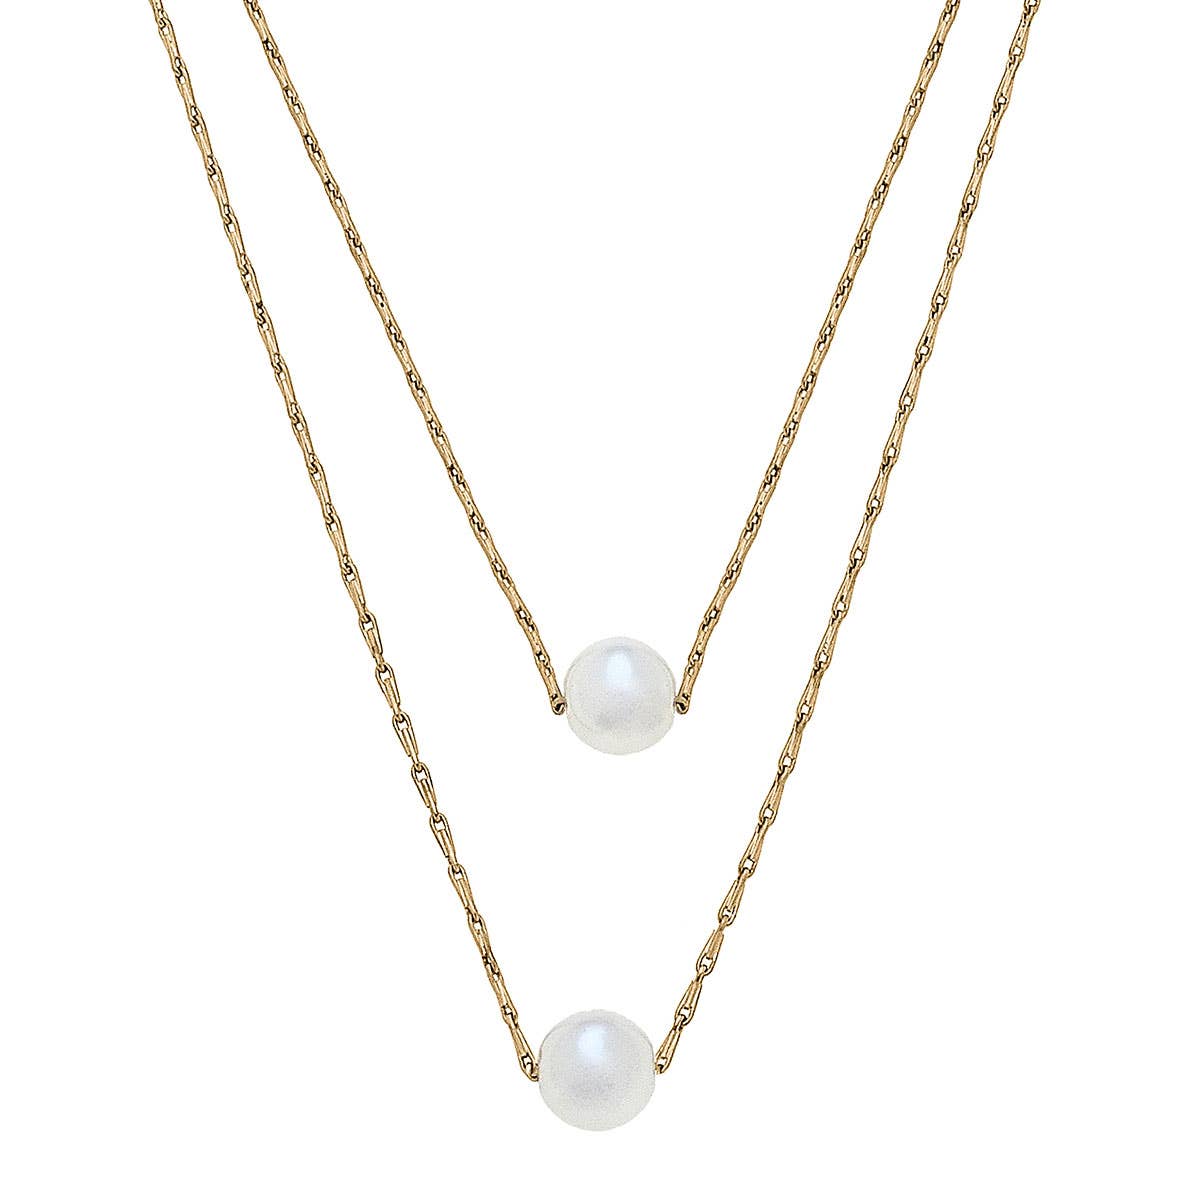 Audrey Layered Pearl Necklace in Worn Gold